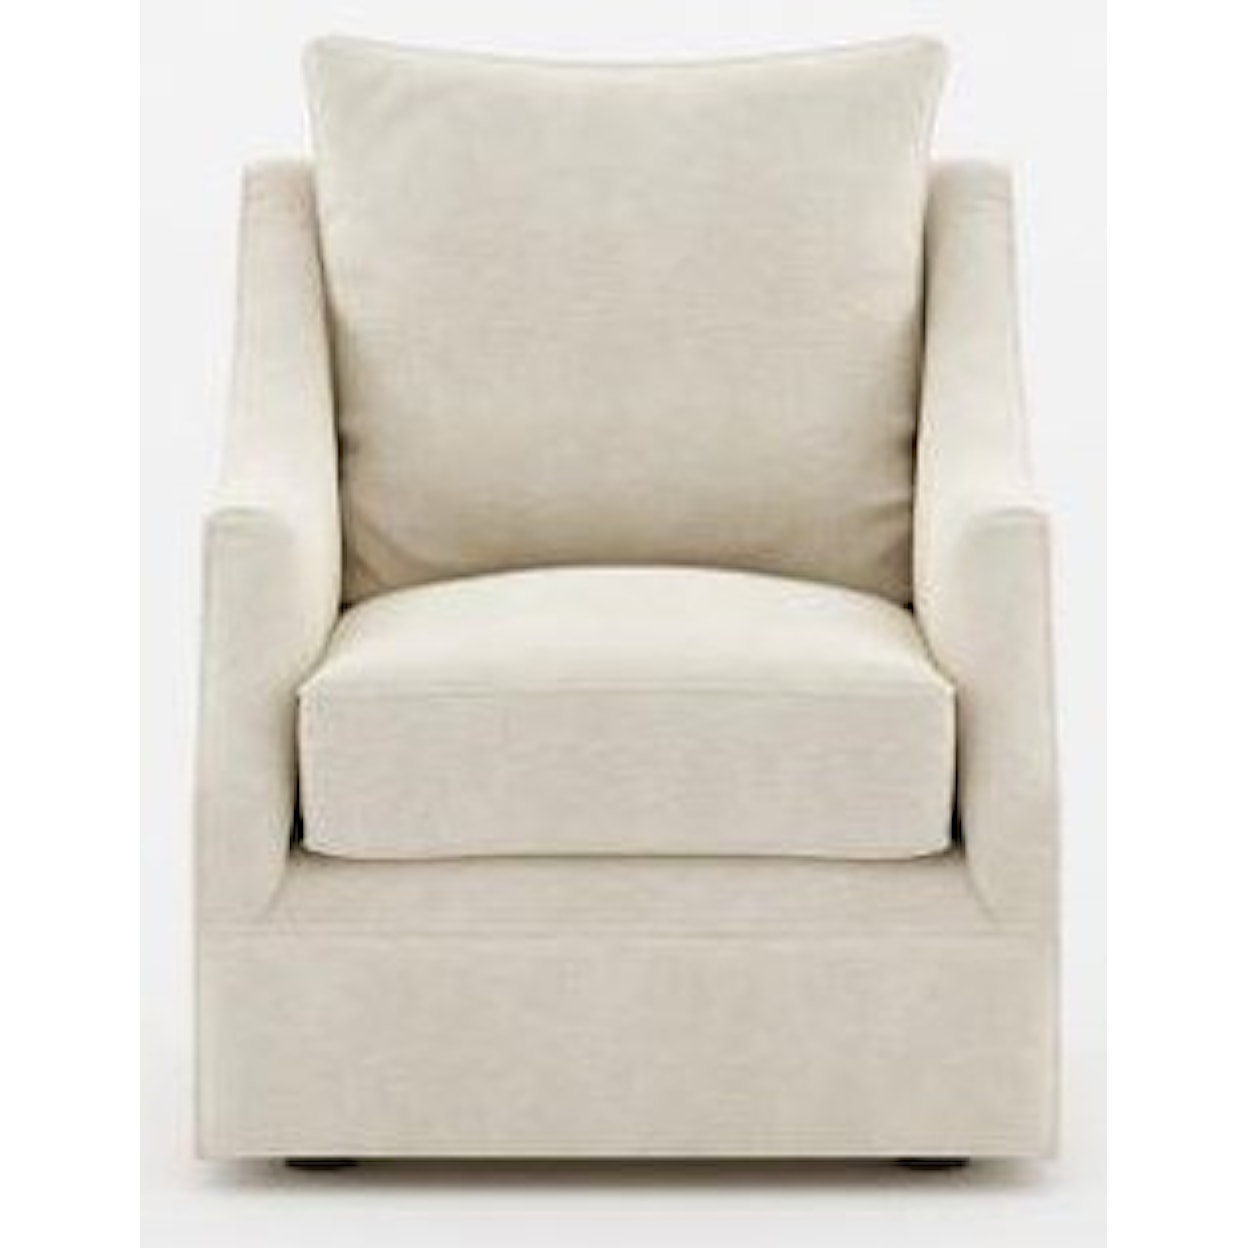 Brentwood Classics 330-24 Dillon Accent Swivel Chair